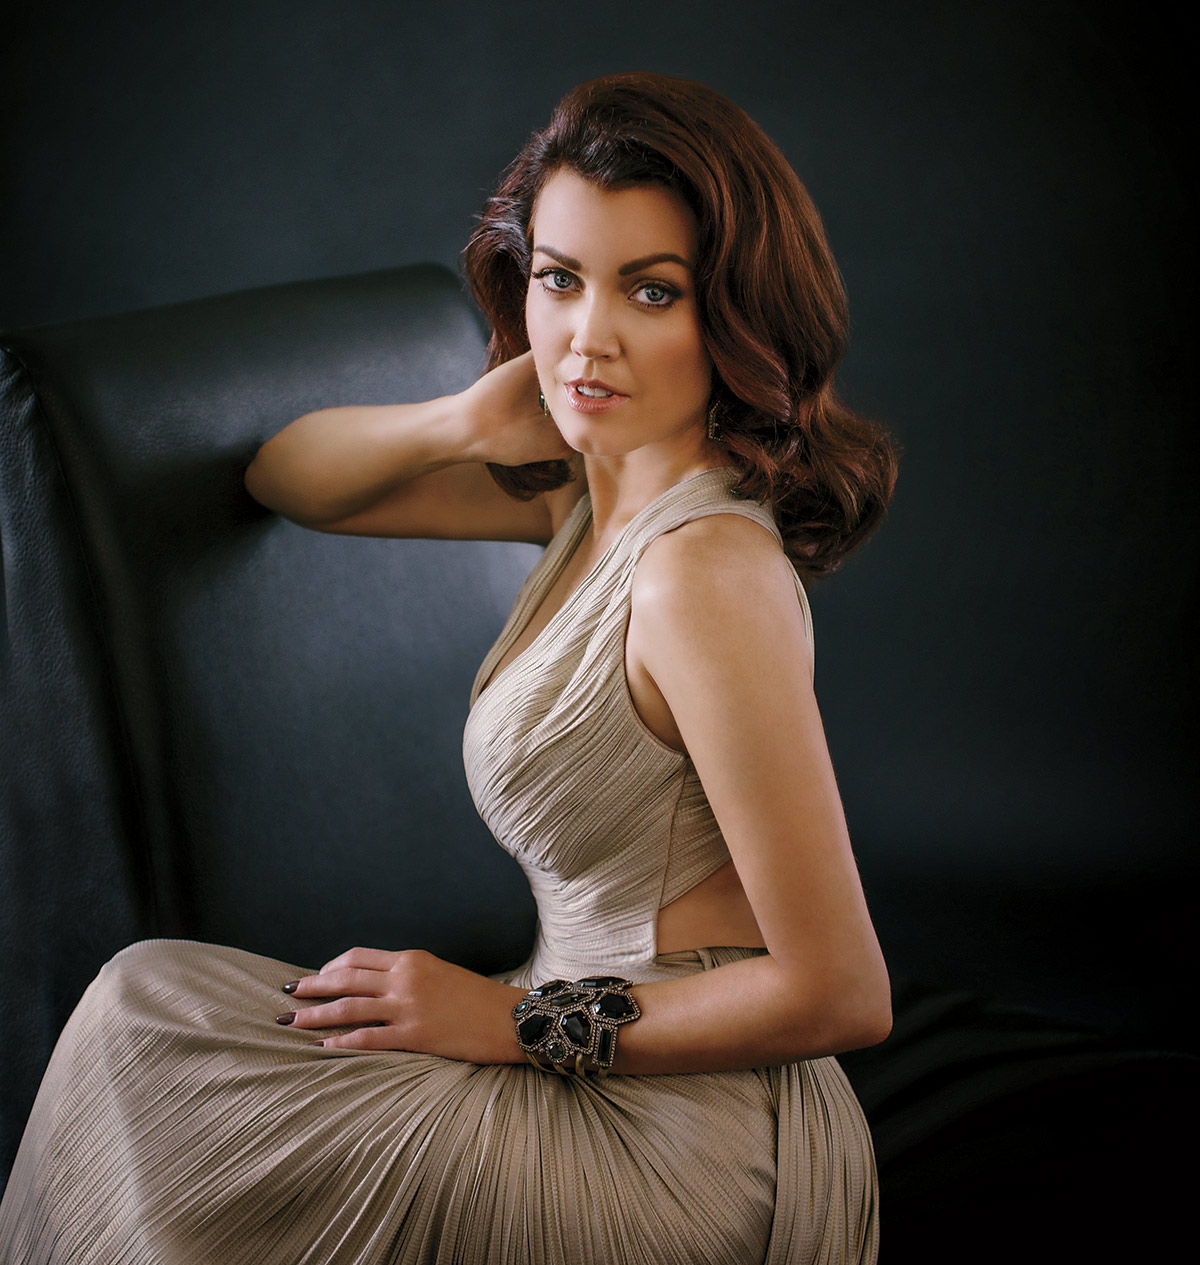 Bellamy young hot